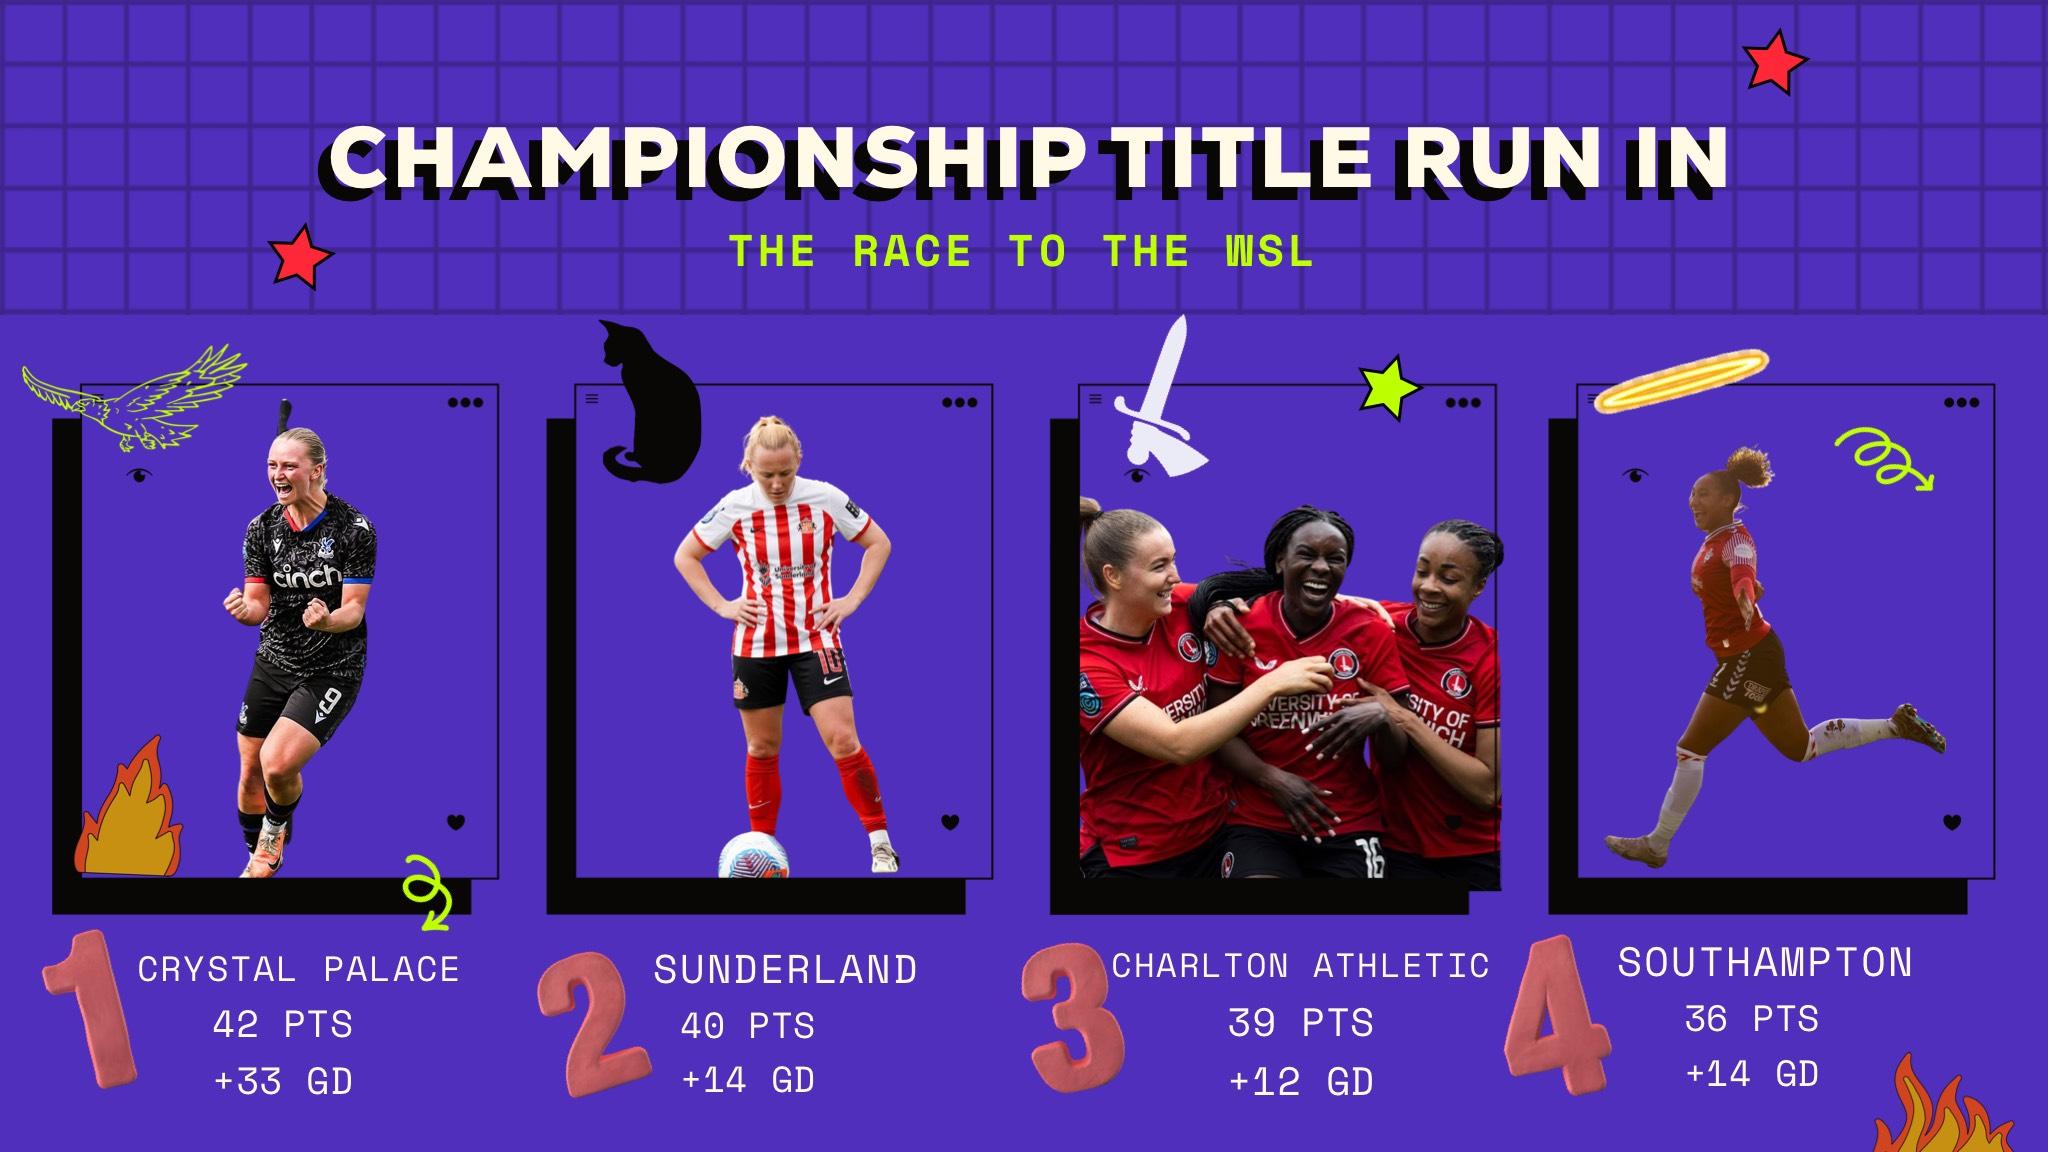 Championship Title Run In: Race to the WSL